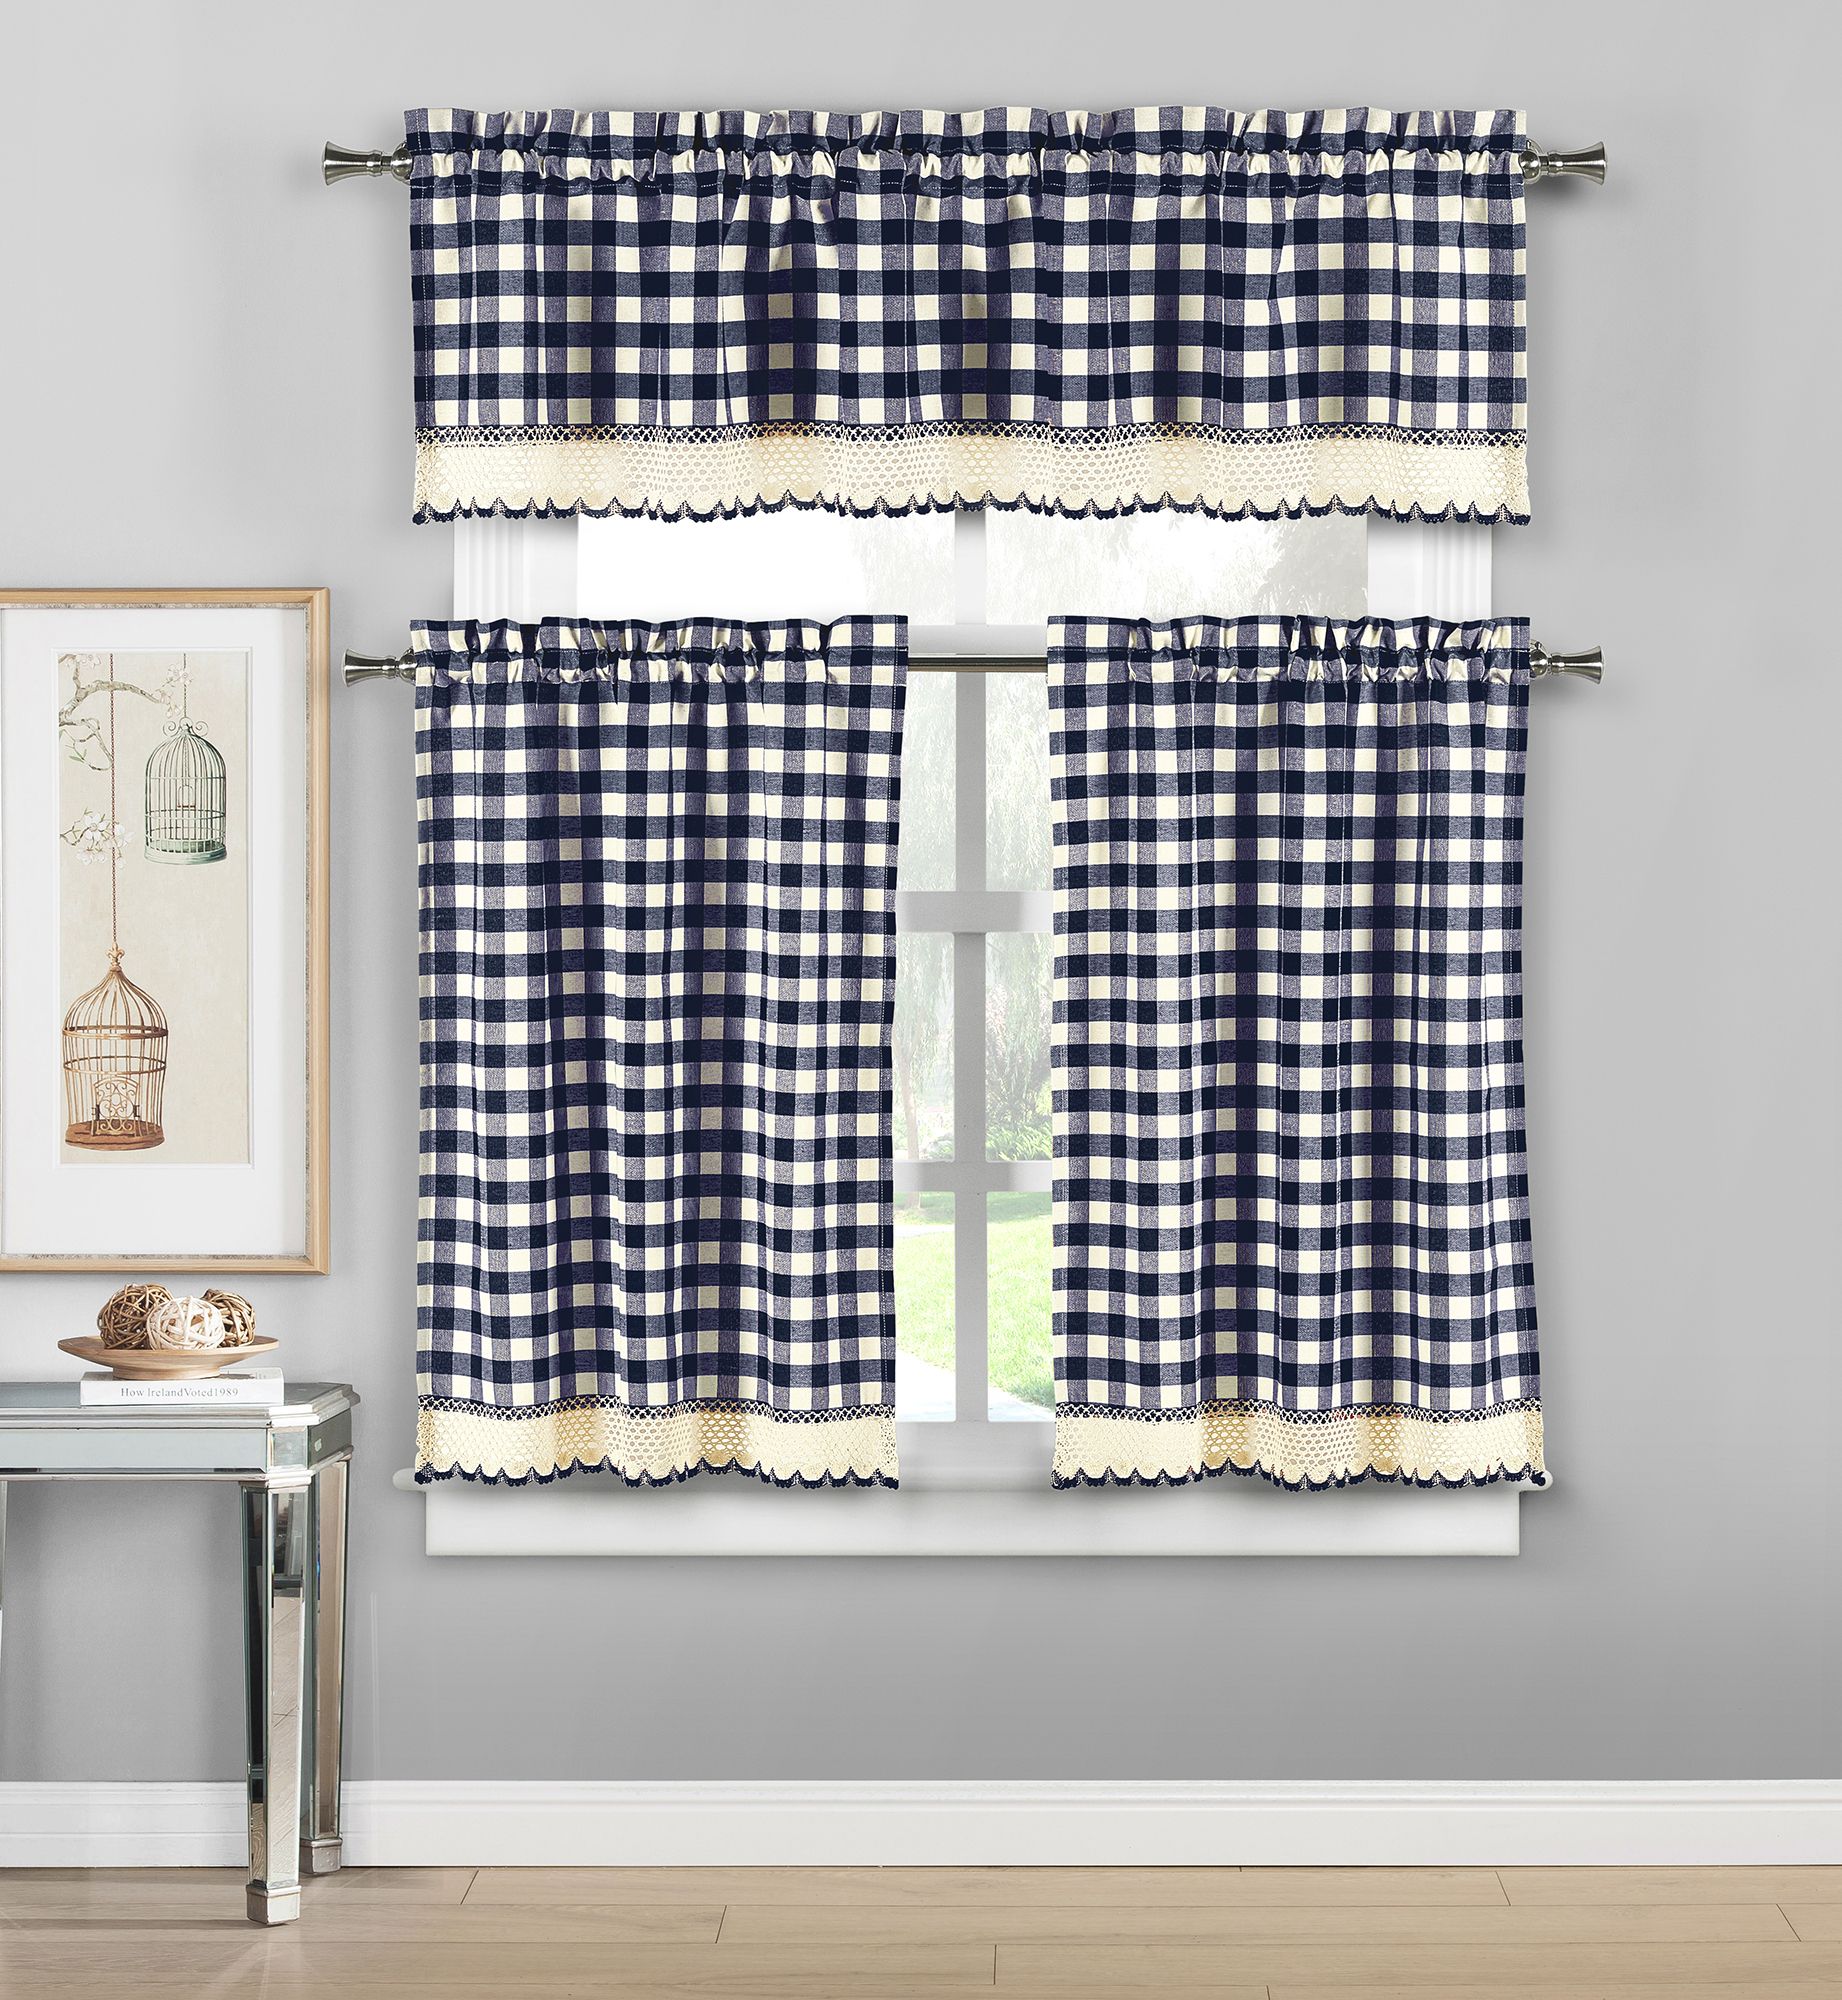 Details About Plaid Checkered Crochet Cotton Blend 3pc Window Curtain  Kitchen Tier & Valance With Lodge Plaid 3 Piece Kitchen Curtain Tier And Valance Sets (Photo 2 of 20)